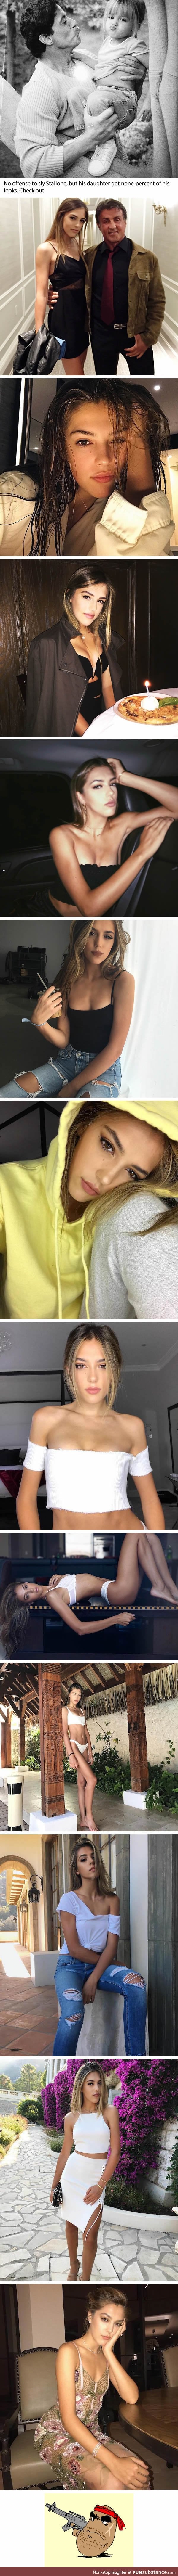 Meet the gorgeous daughter of rambo: Sistine stallone